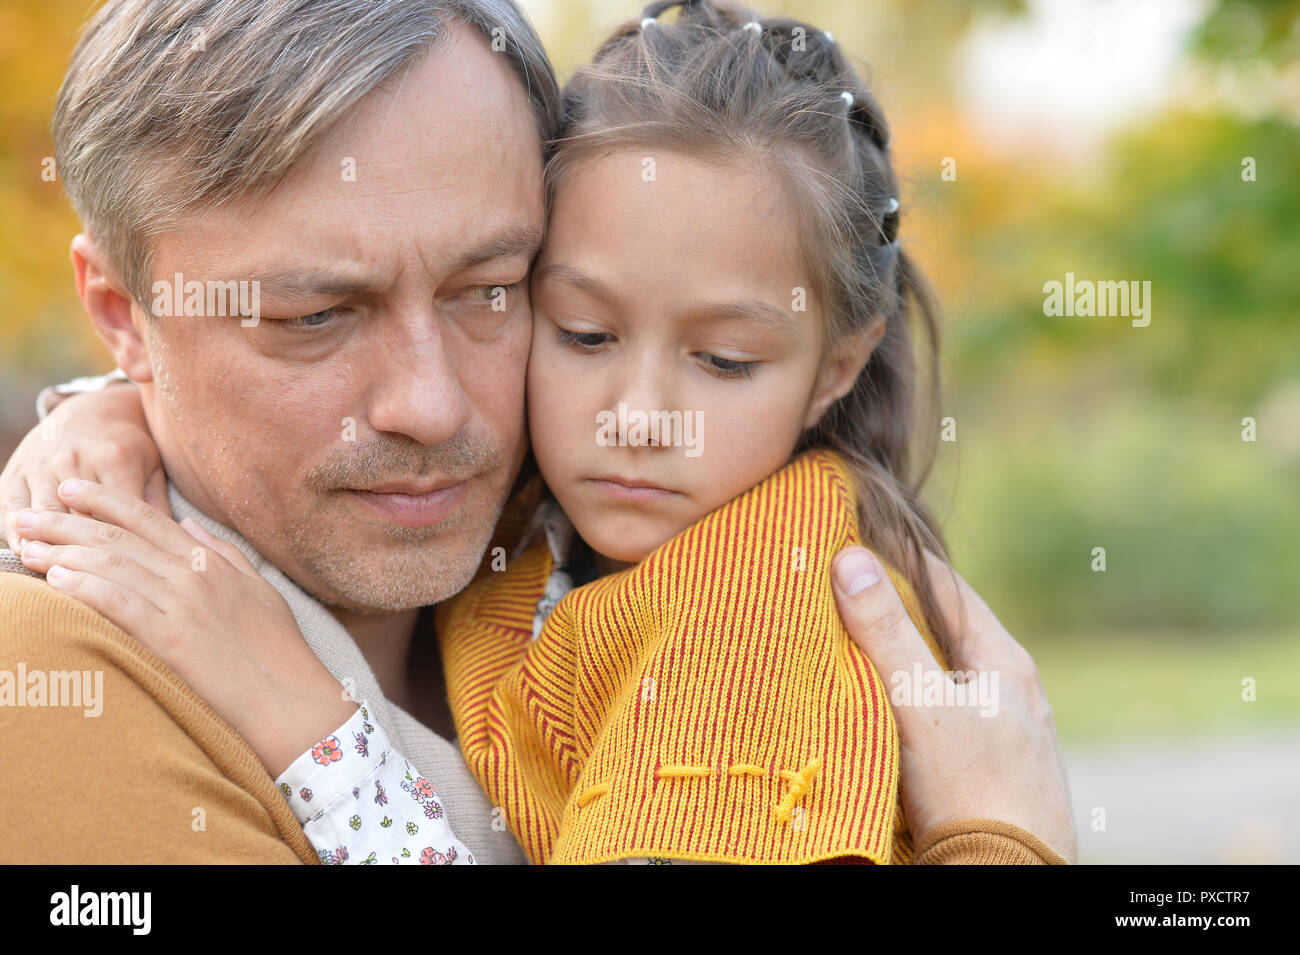 Portrait of father and daughter outdoors in autumn park Stock Photo